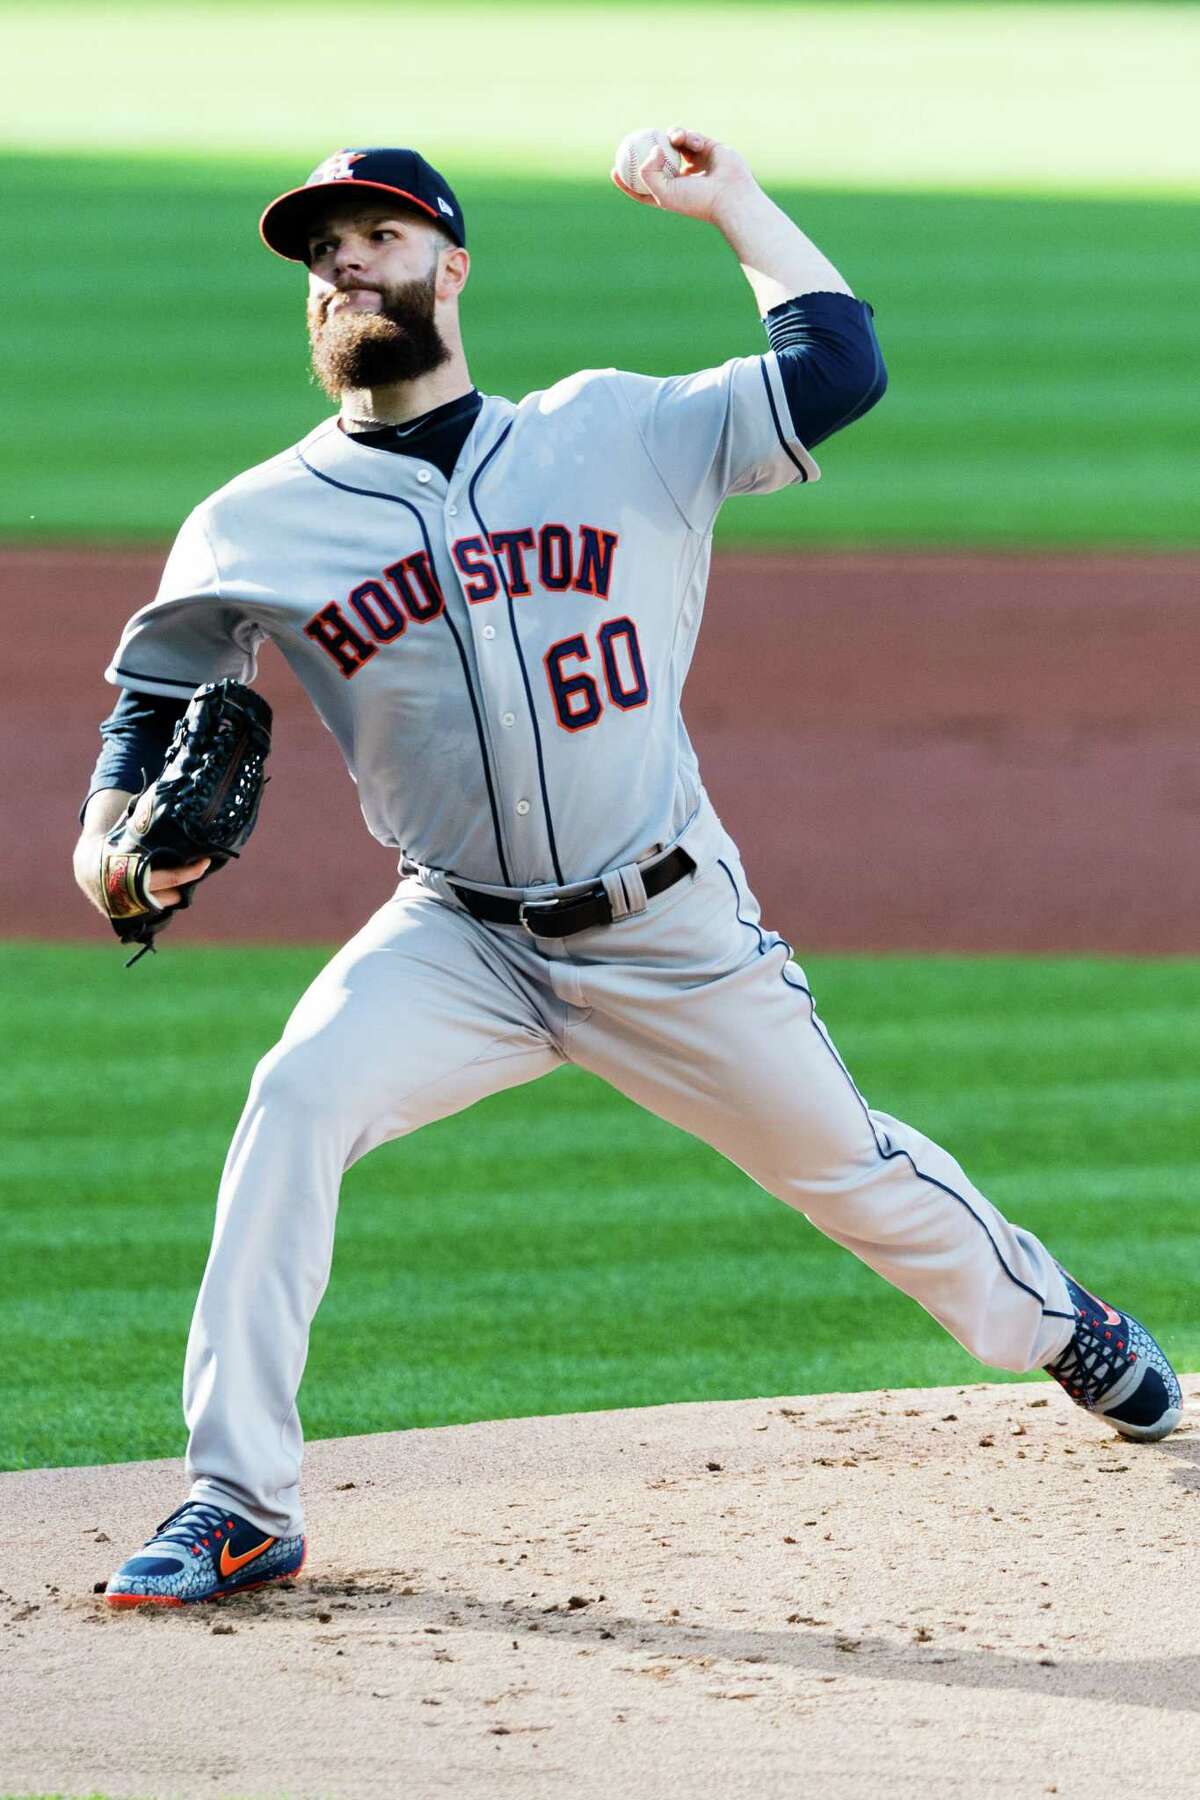 CLEVELAND, OH - APRIL 25: Starting pitcher Dallas Keuchel #60 of the Houston Astros pitches during the first inning against the Cleveland Indians at Progressive Field on April 25, 2017 in Cleveland, Ohio.